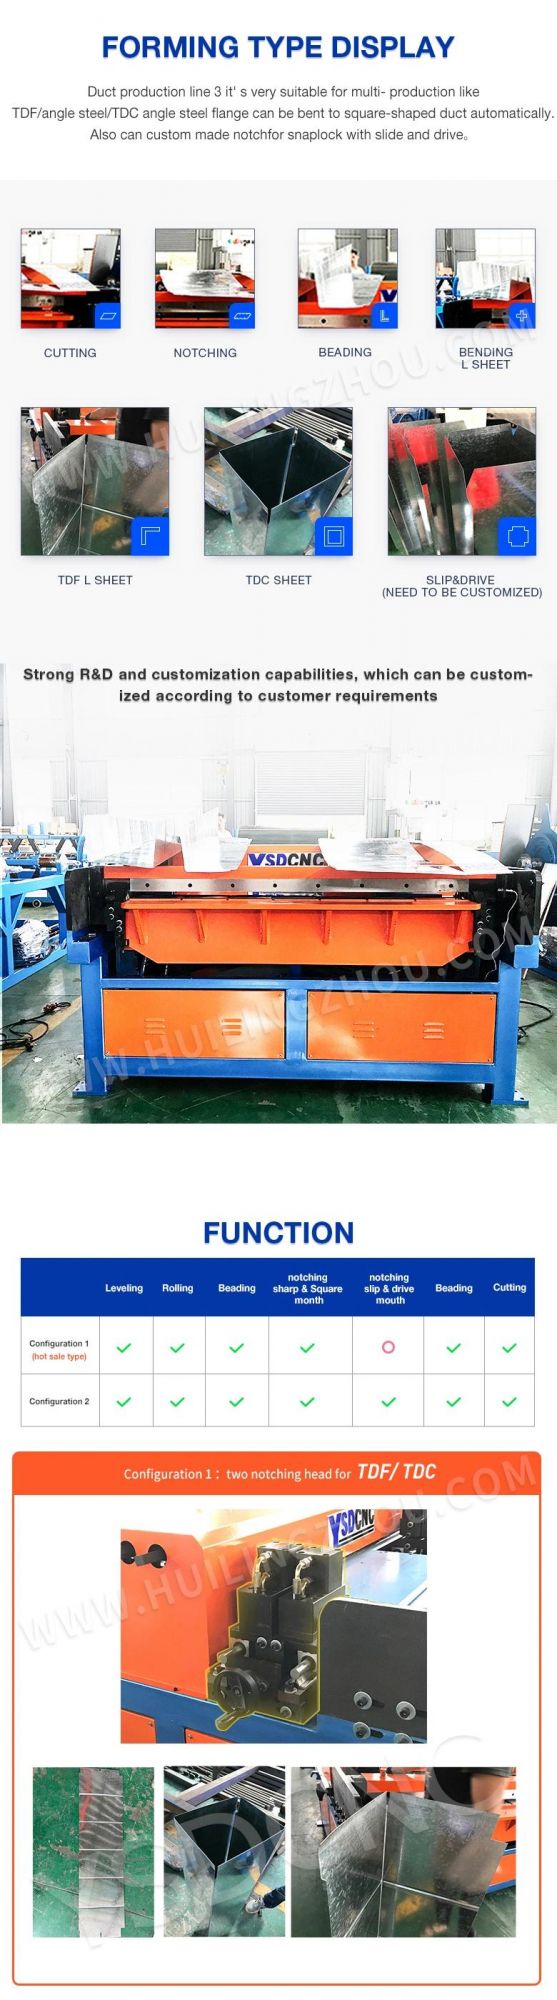 HVAC Duct Making Machine Production Auto Line 3 by Ysdcnc Manufacturer